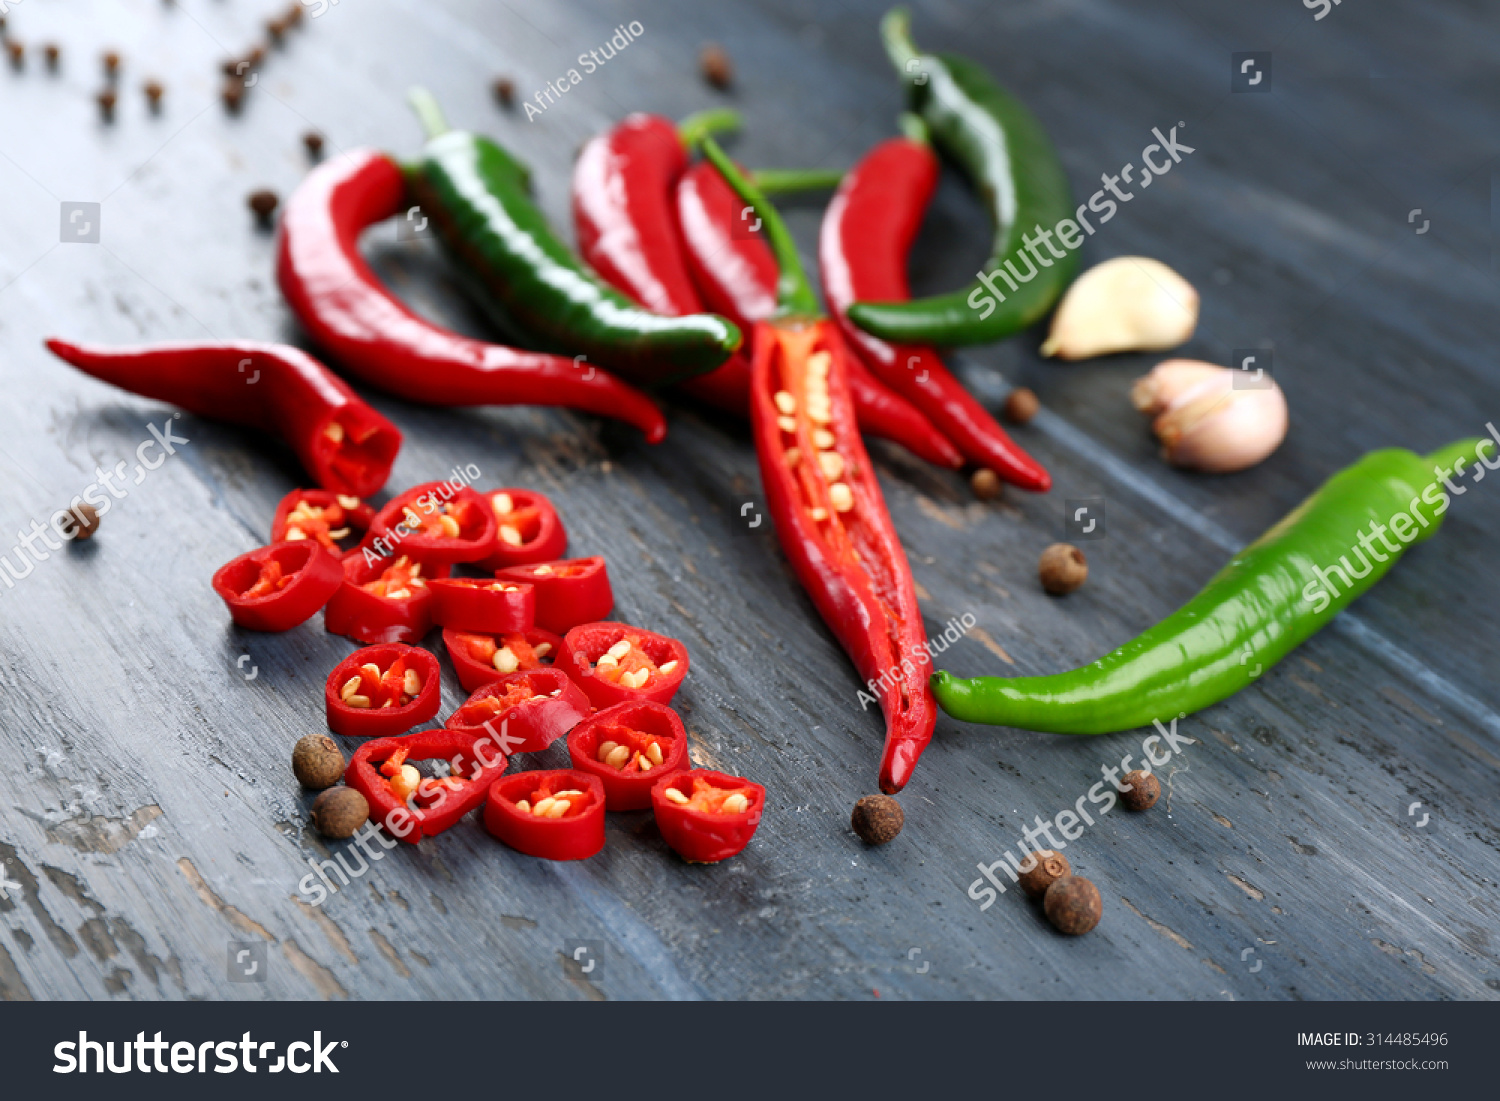 Hot peppers with spices on wooden table close up #314485496